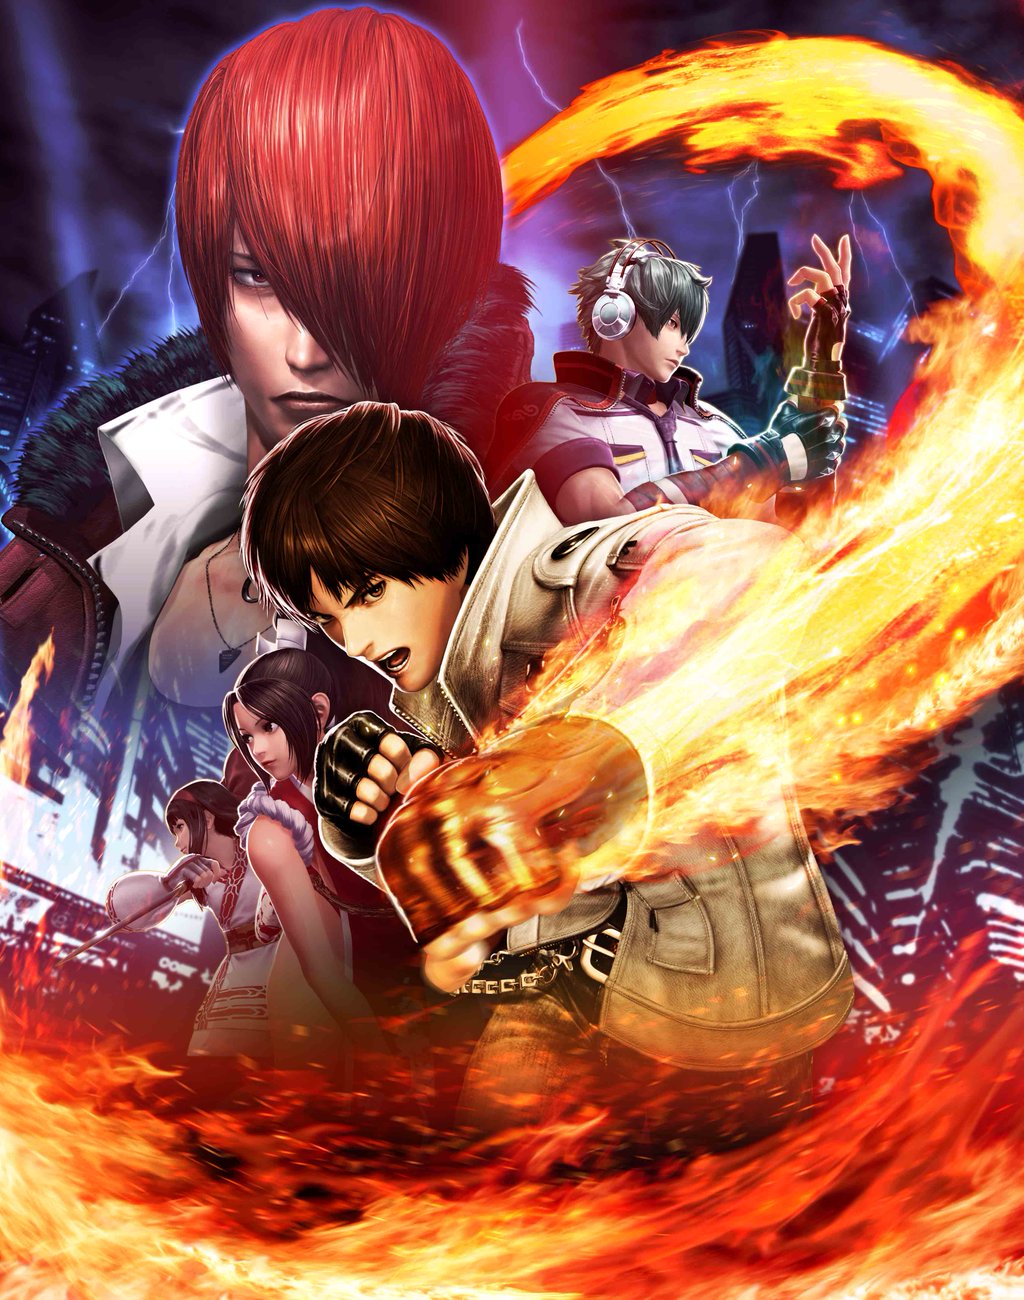 art works softcover The King of Fighters XIV